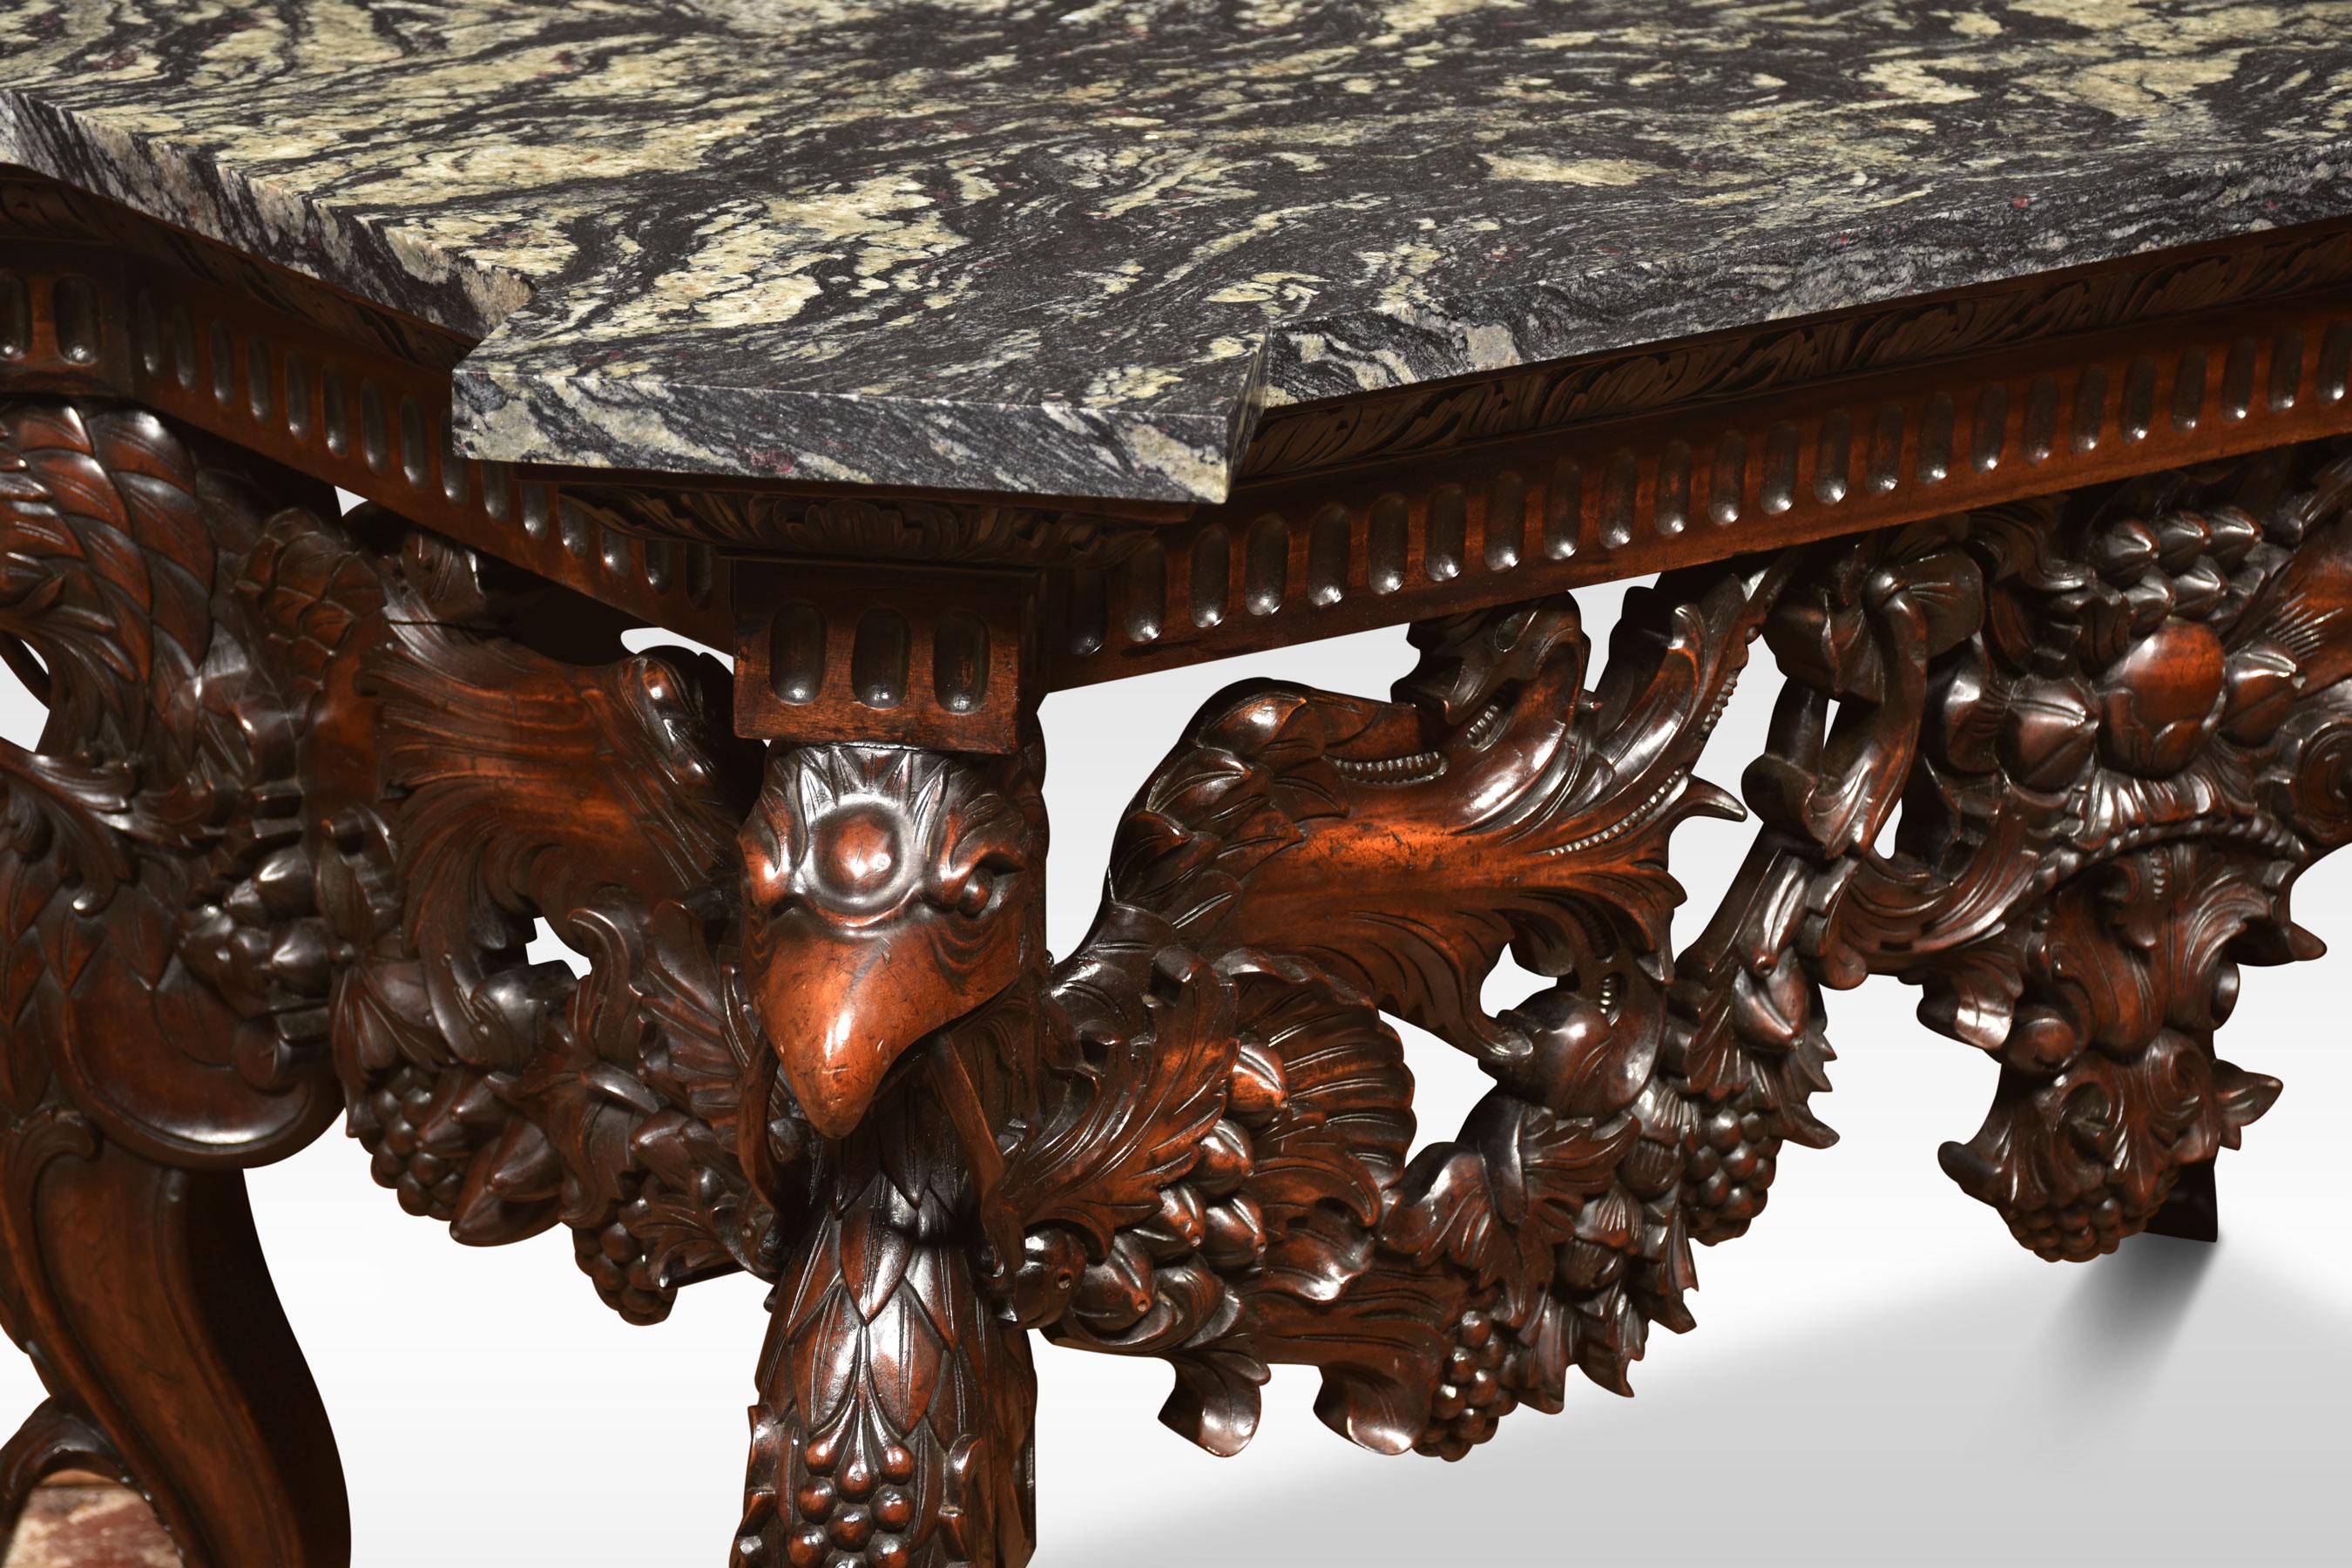 Large Impressive console table the large well-figured marble top with protruding corners above a heavily carved walnut base with pierce scrolling foliated decoration, raised on four eagle-headed cabriole legs with square feet.
Dimensions
Height 35